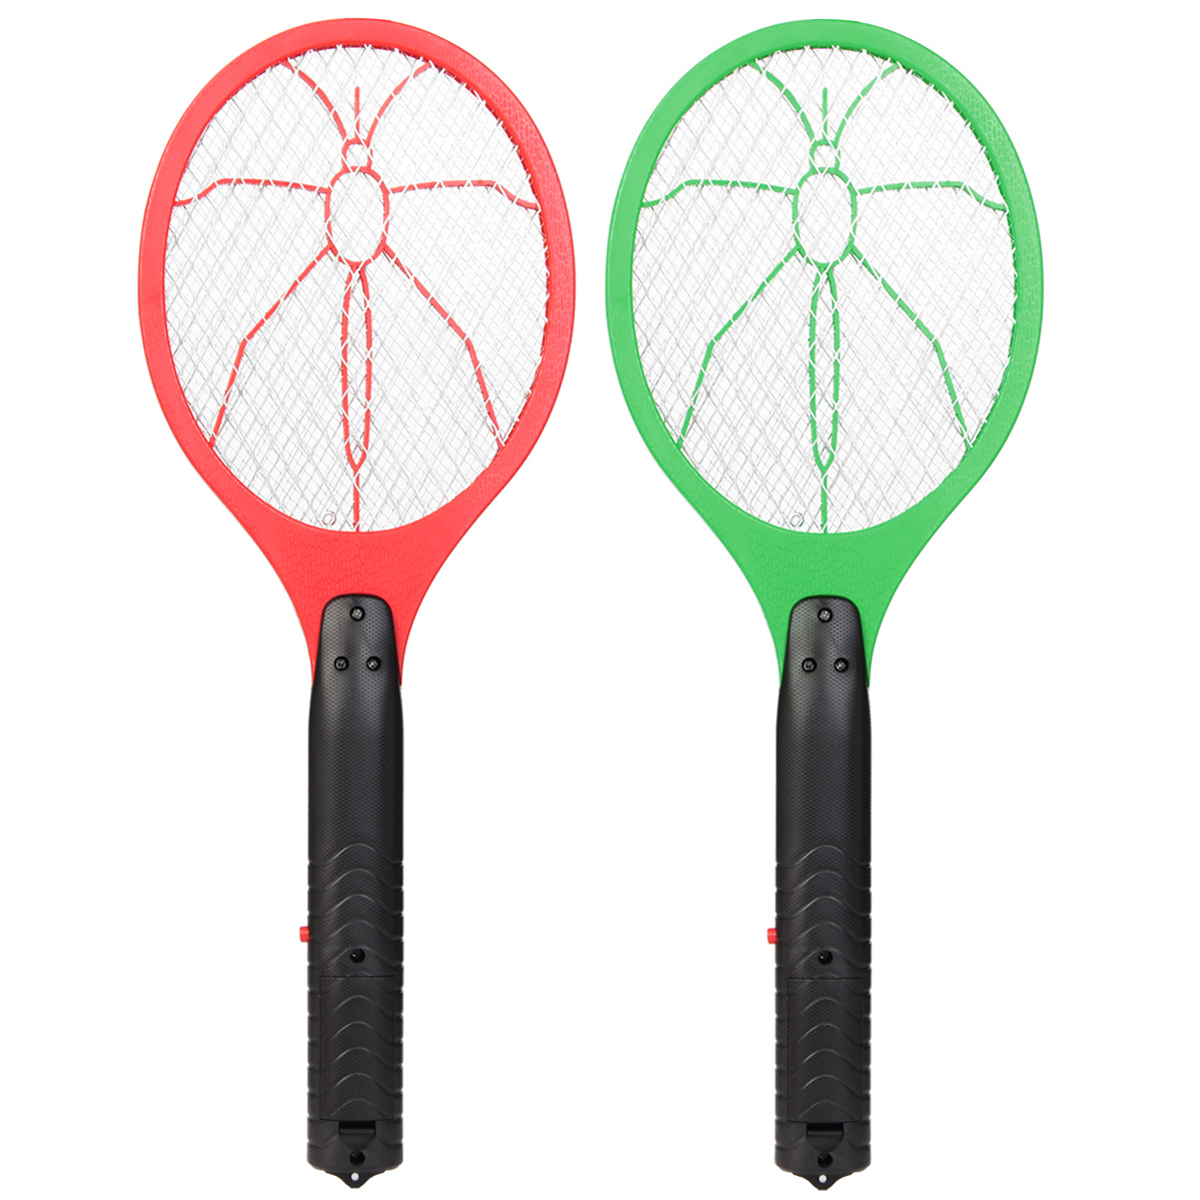 

Electric Practical Insect Bug 3 Layer Mesh Fly Mosquito Dispeller Zapper Swatter Killer Racket Tools